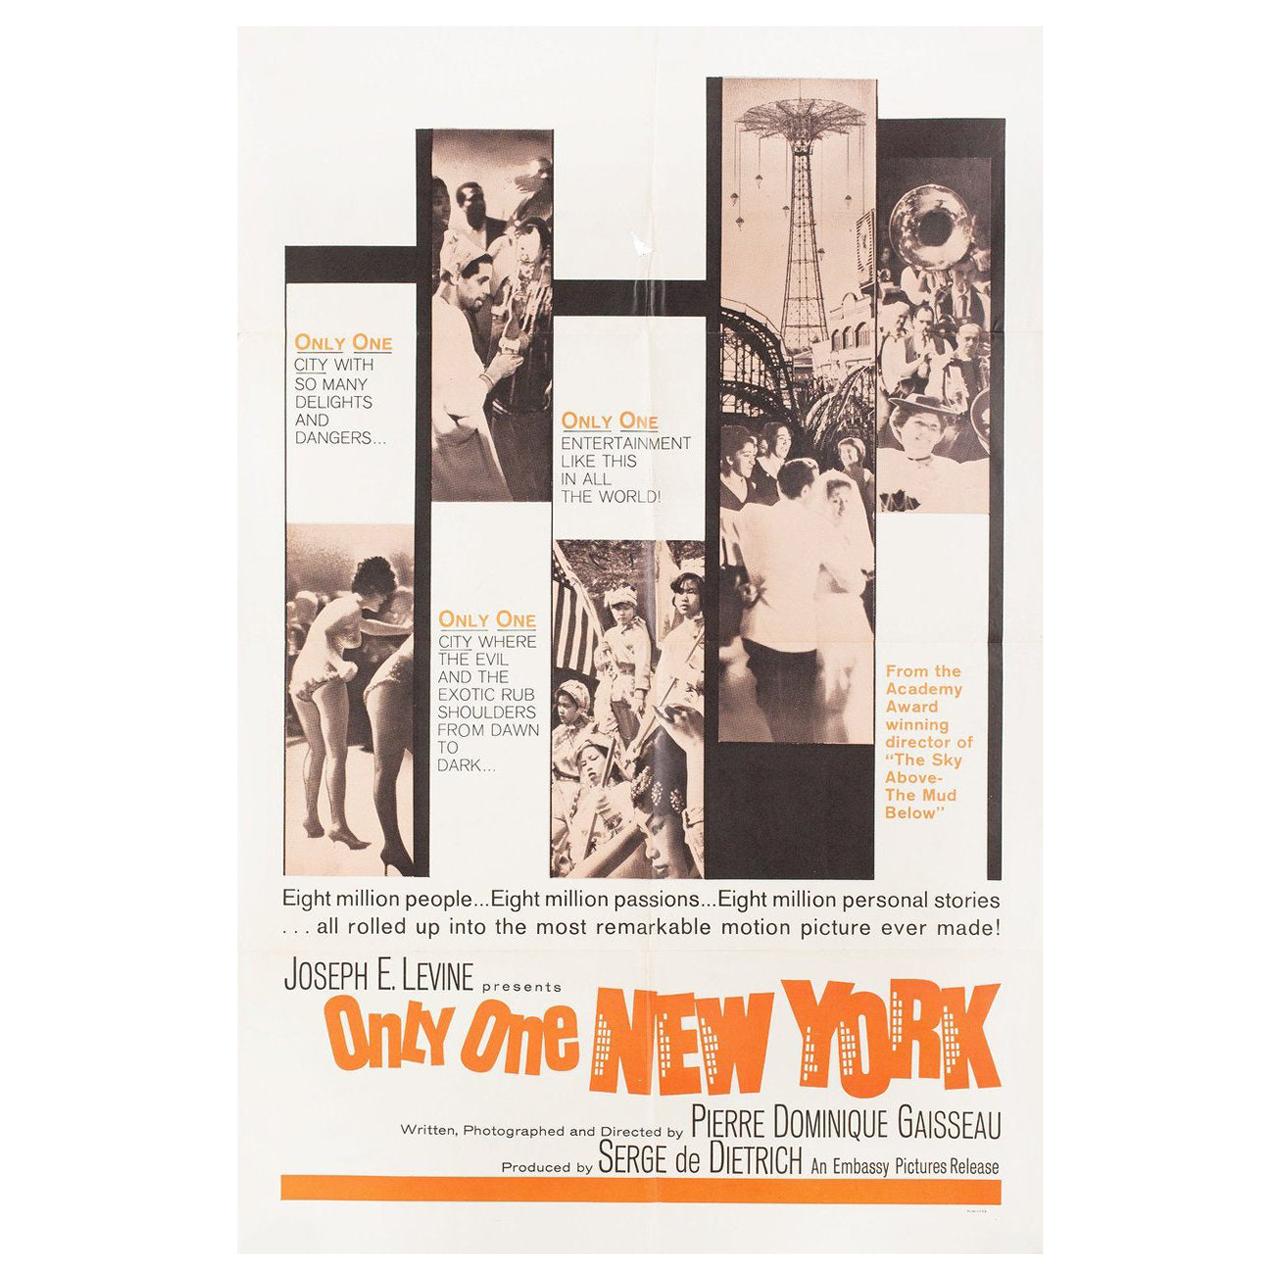 "Only One New York" 1964 U.S. One Sheet Film Poster